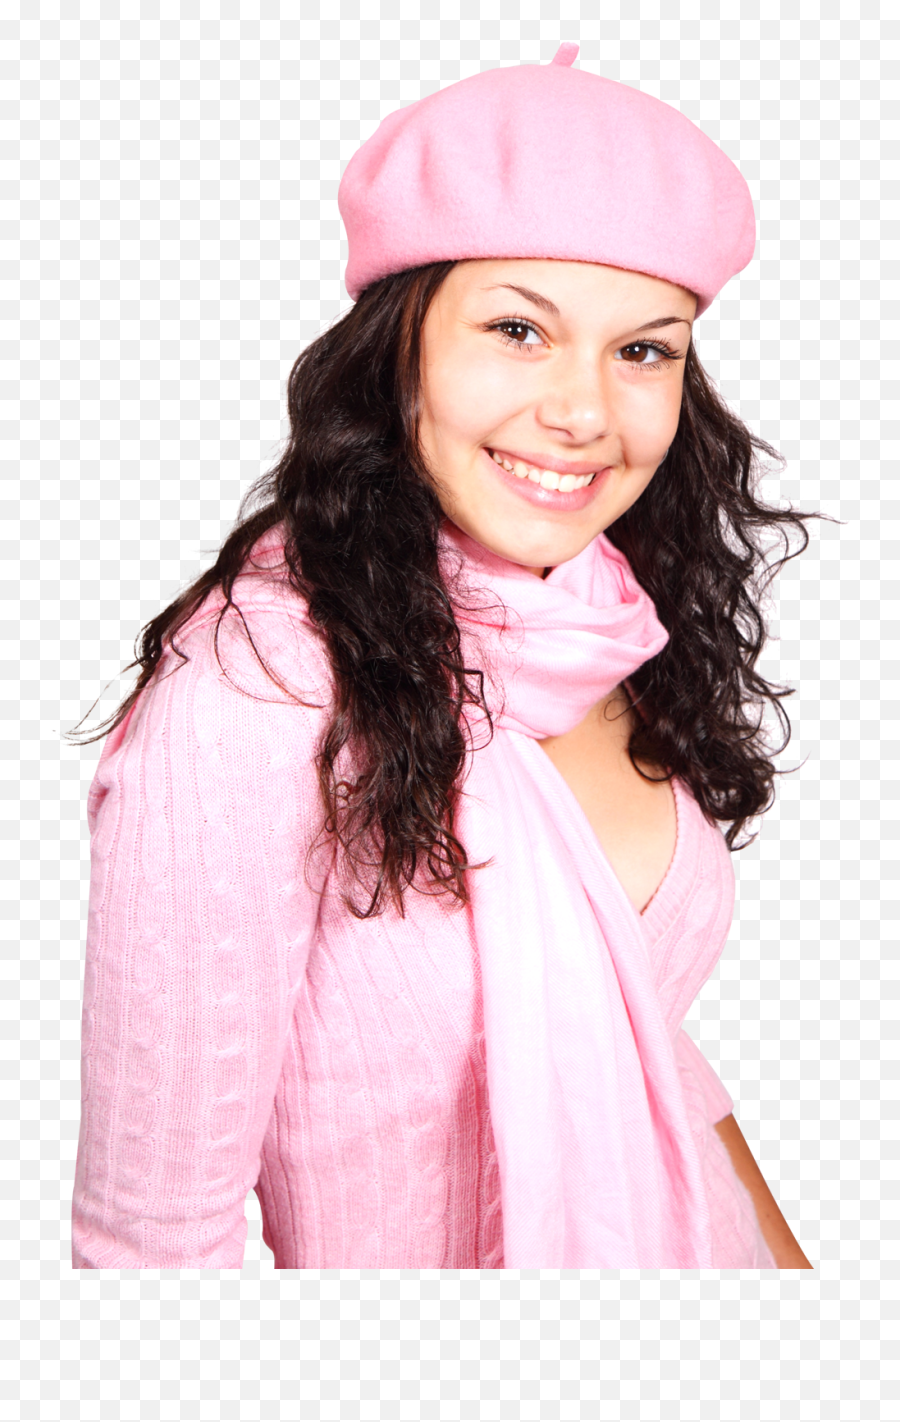 Beautiful Girl In Pink Dress Png Image - Portable Network Graphics,Beautiful Png